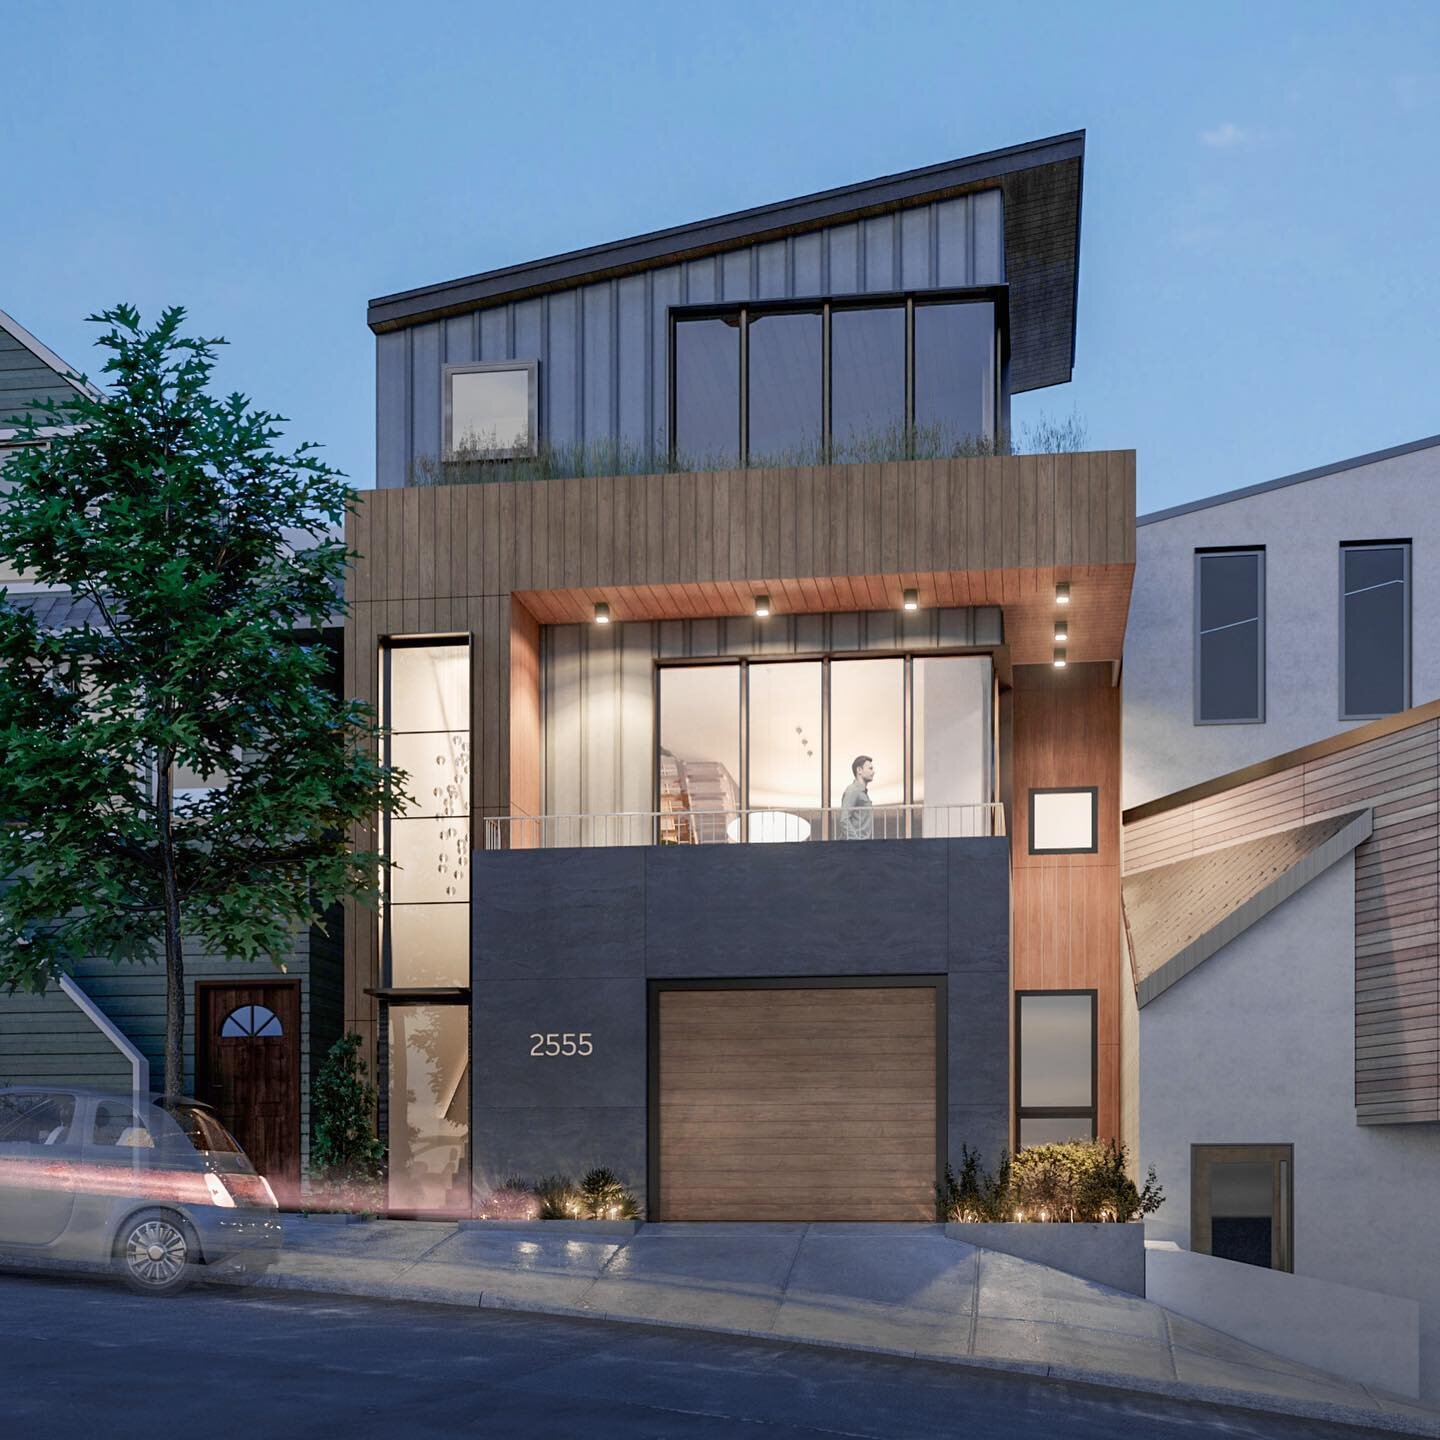 Our upcoming Diamond St project. Visualization by @malykrasotadesign